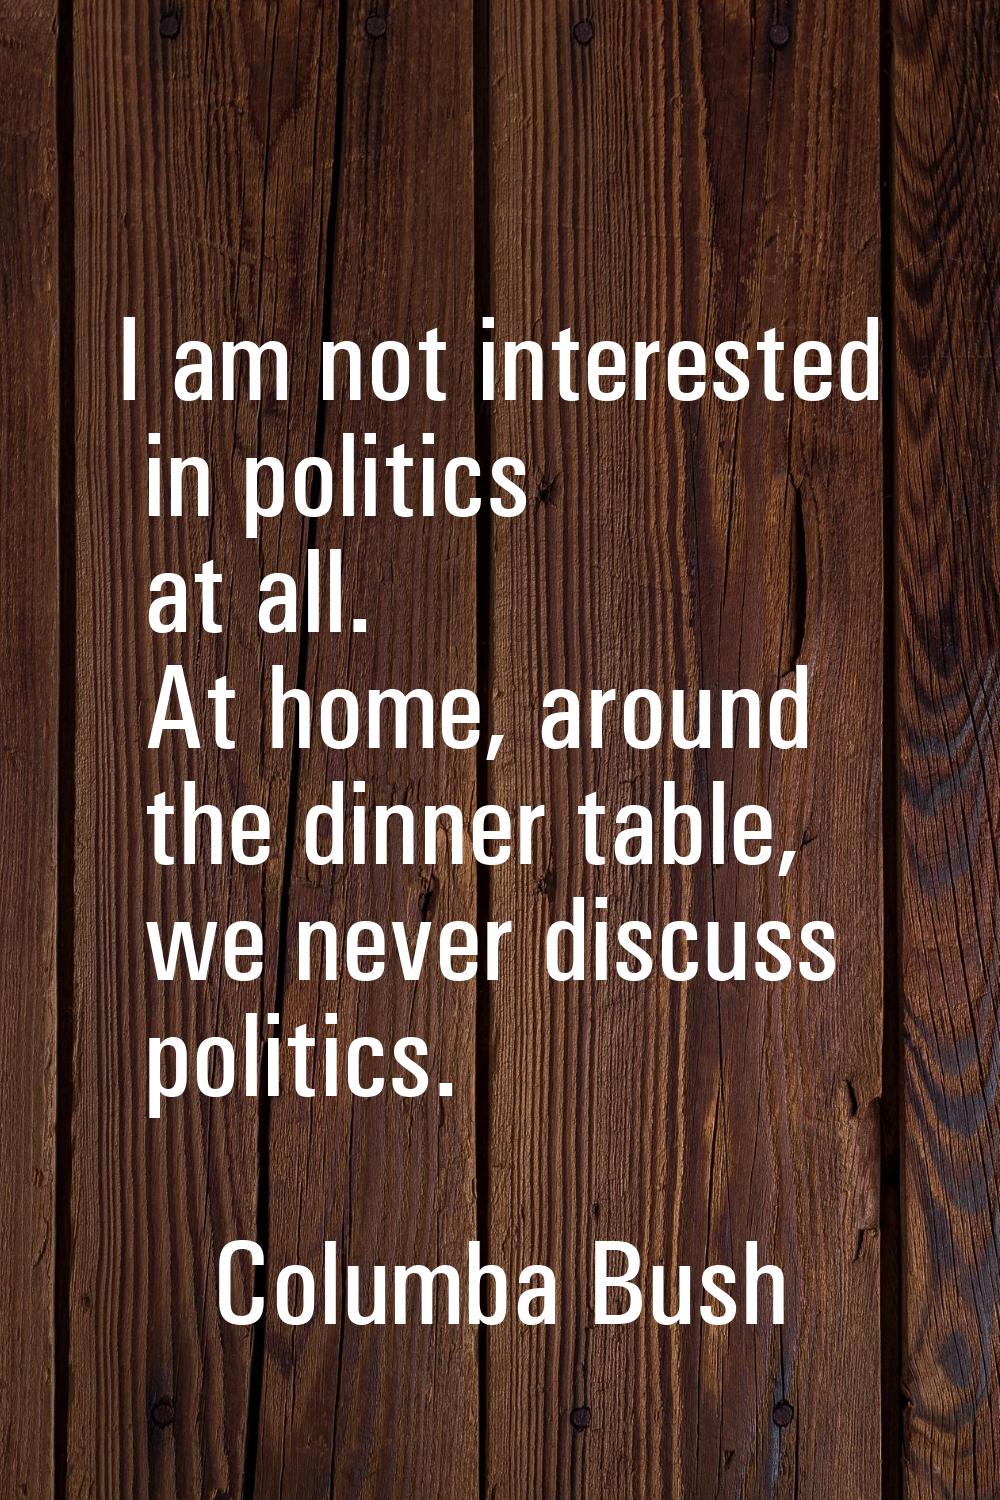 I am not interested in politics at all. At home, around the dinner table, we never discuss politics